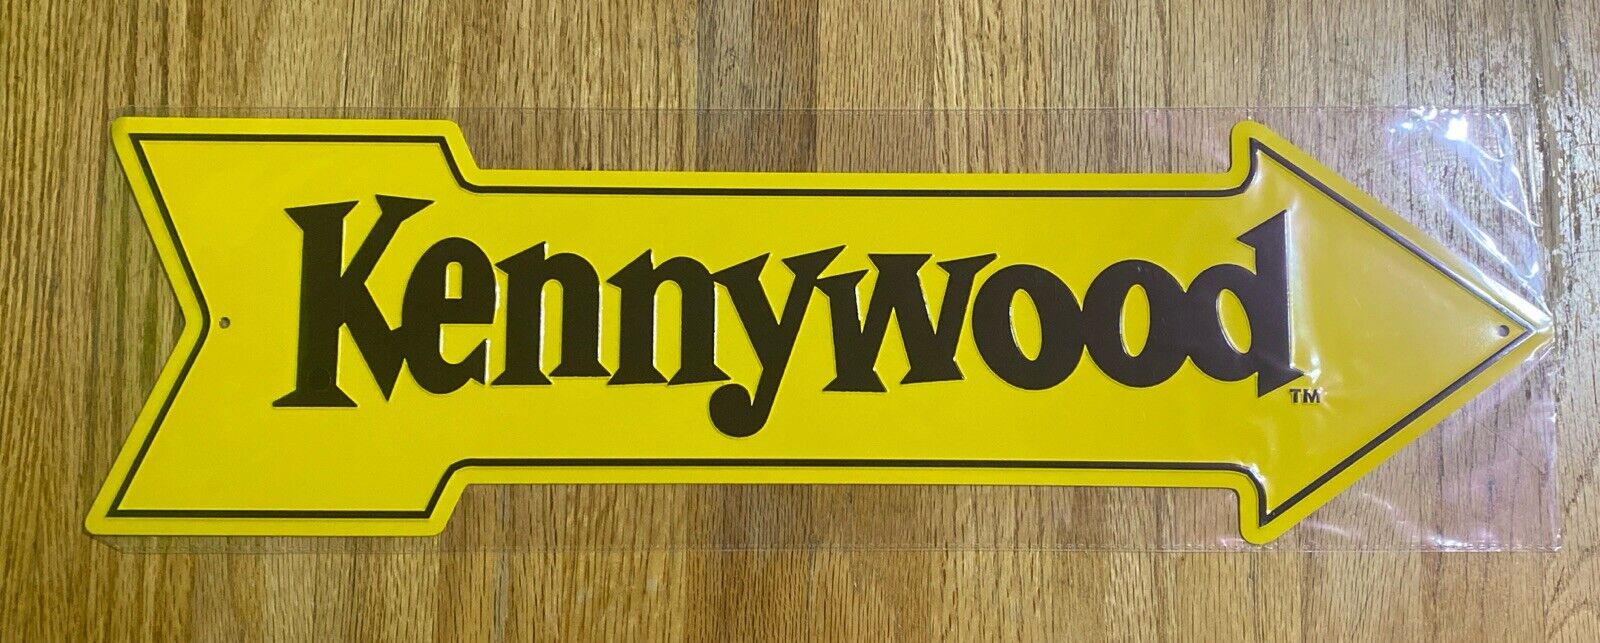 Kennywood Park Arrow, Metal sign. Pittsburgh, PA. 20 inches long. Brand New